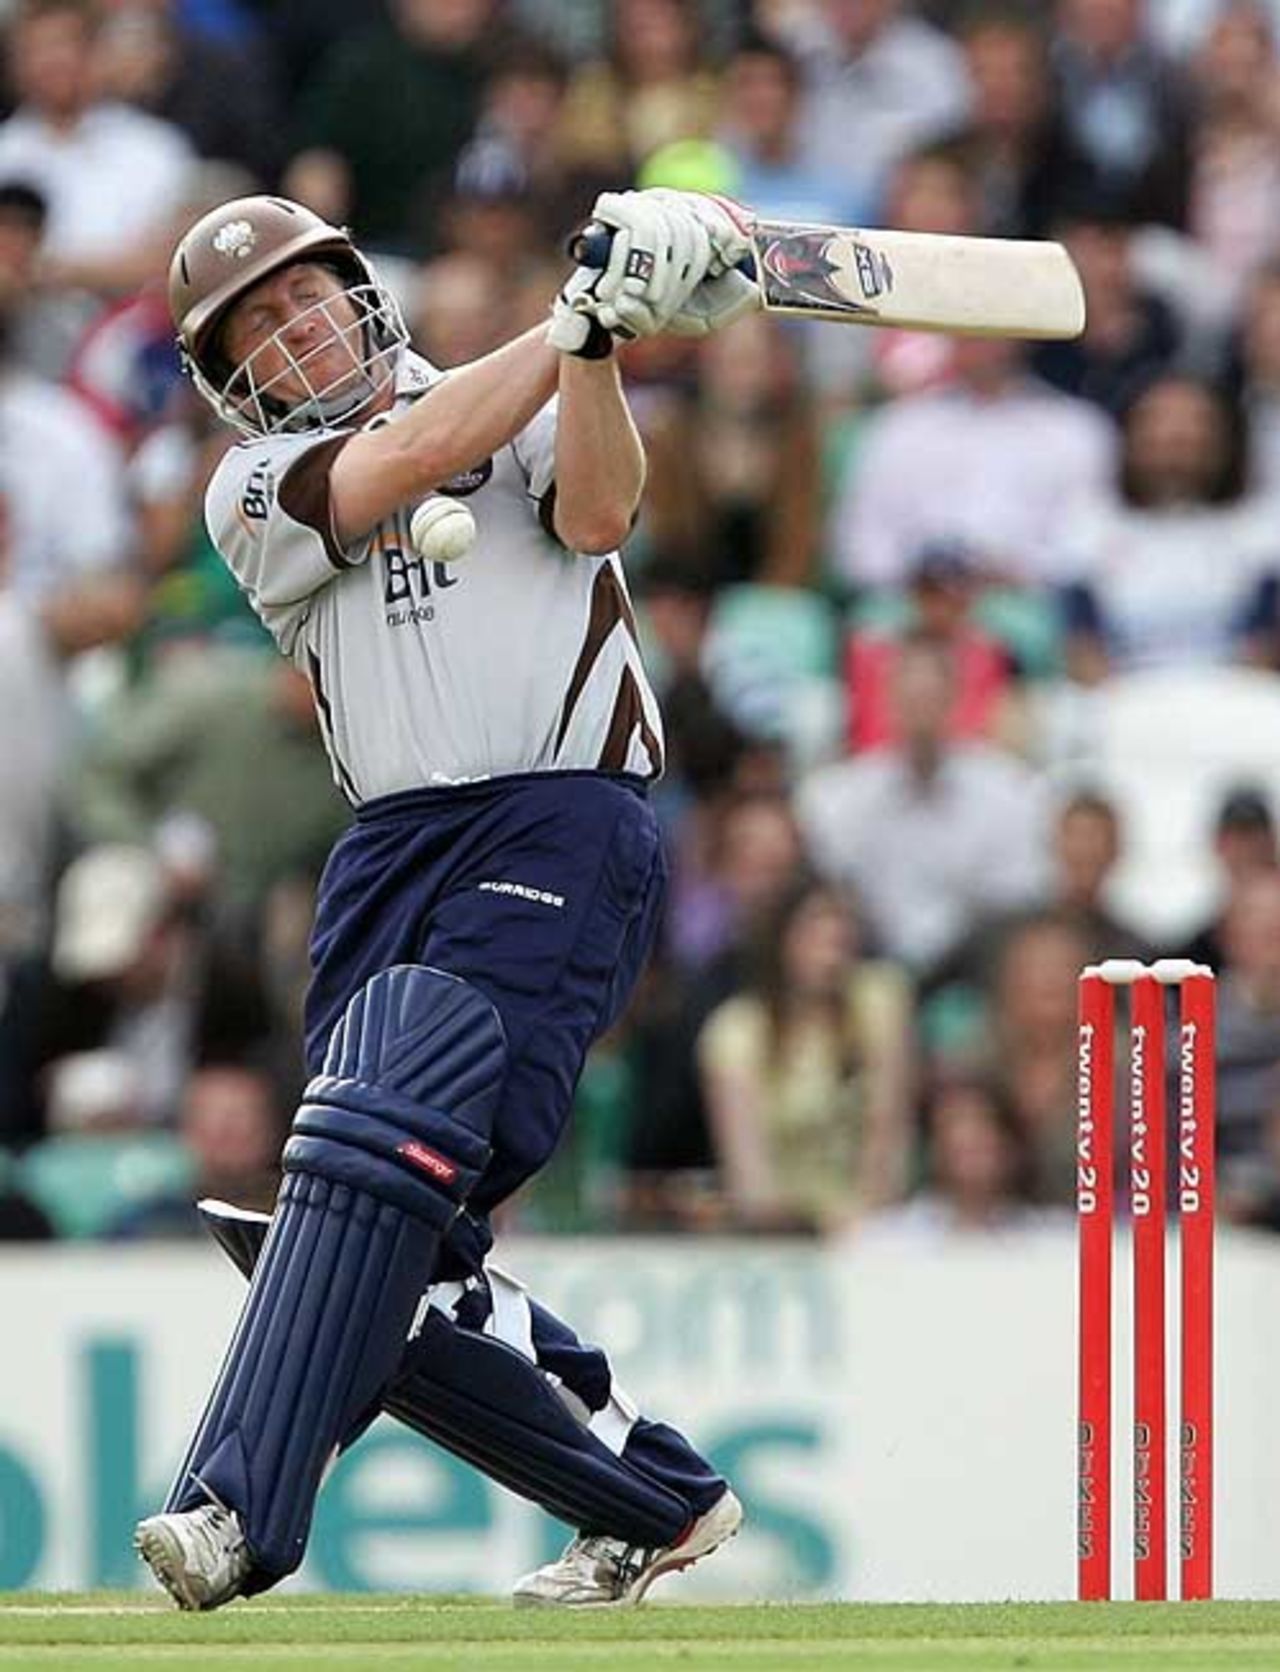 Surrey's Ali Brown fails to connect bat to ball in the Twenty20 Cup match against Kent, The Oval, July 6, 2007